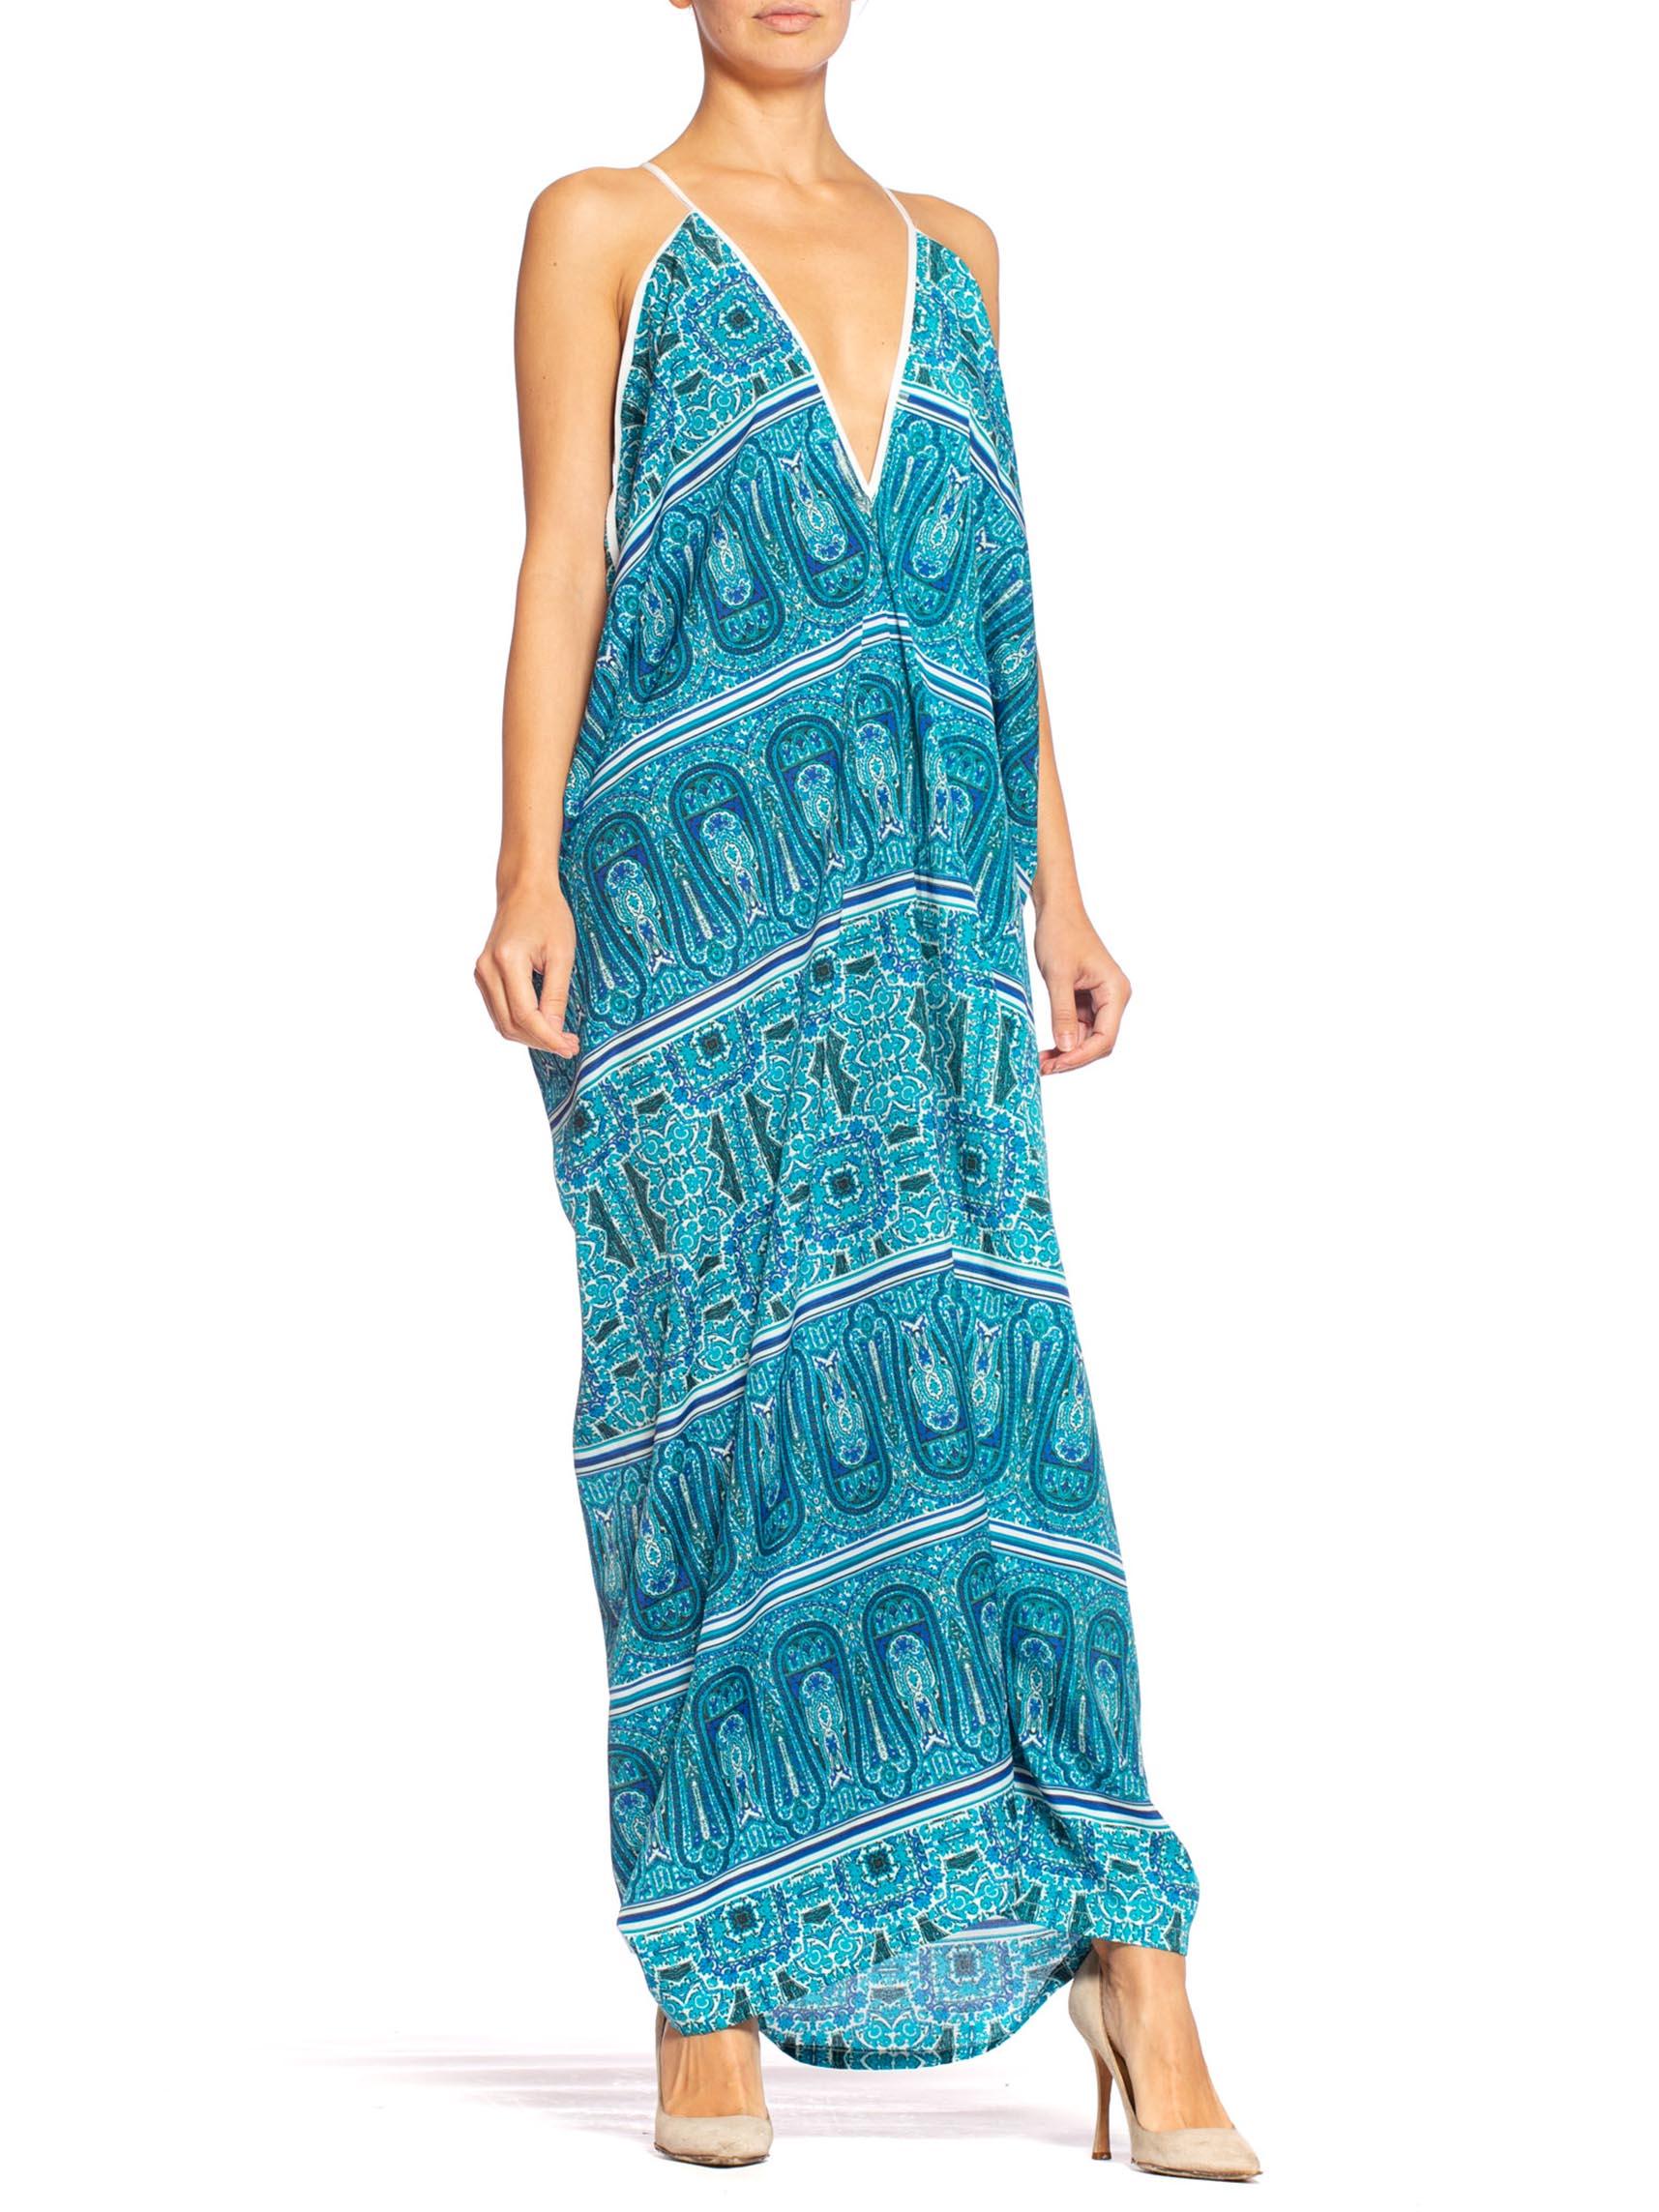 MORPHEW COLLECTION Teal Paisley Poly Blend Easy Breezy Everbody Maxi Dress Made 4